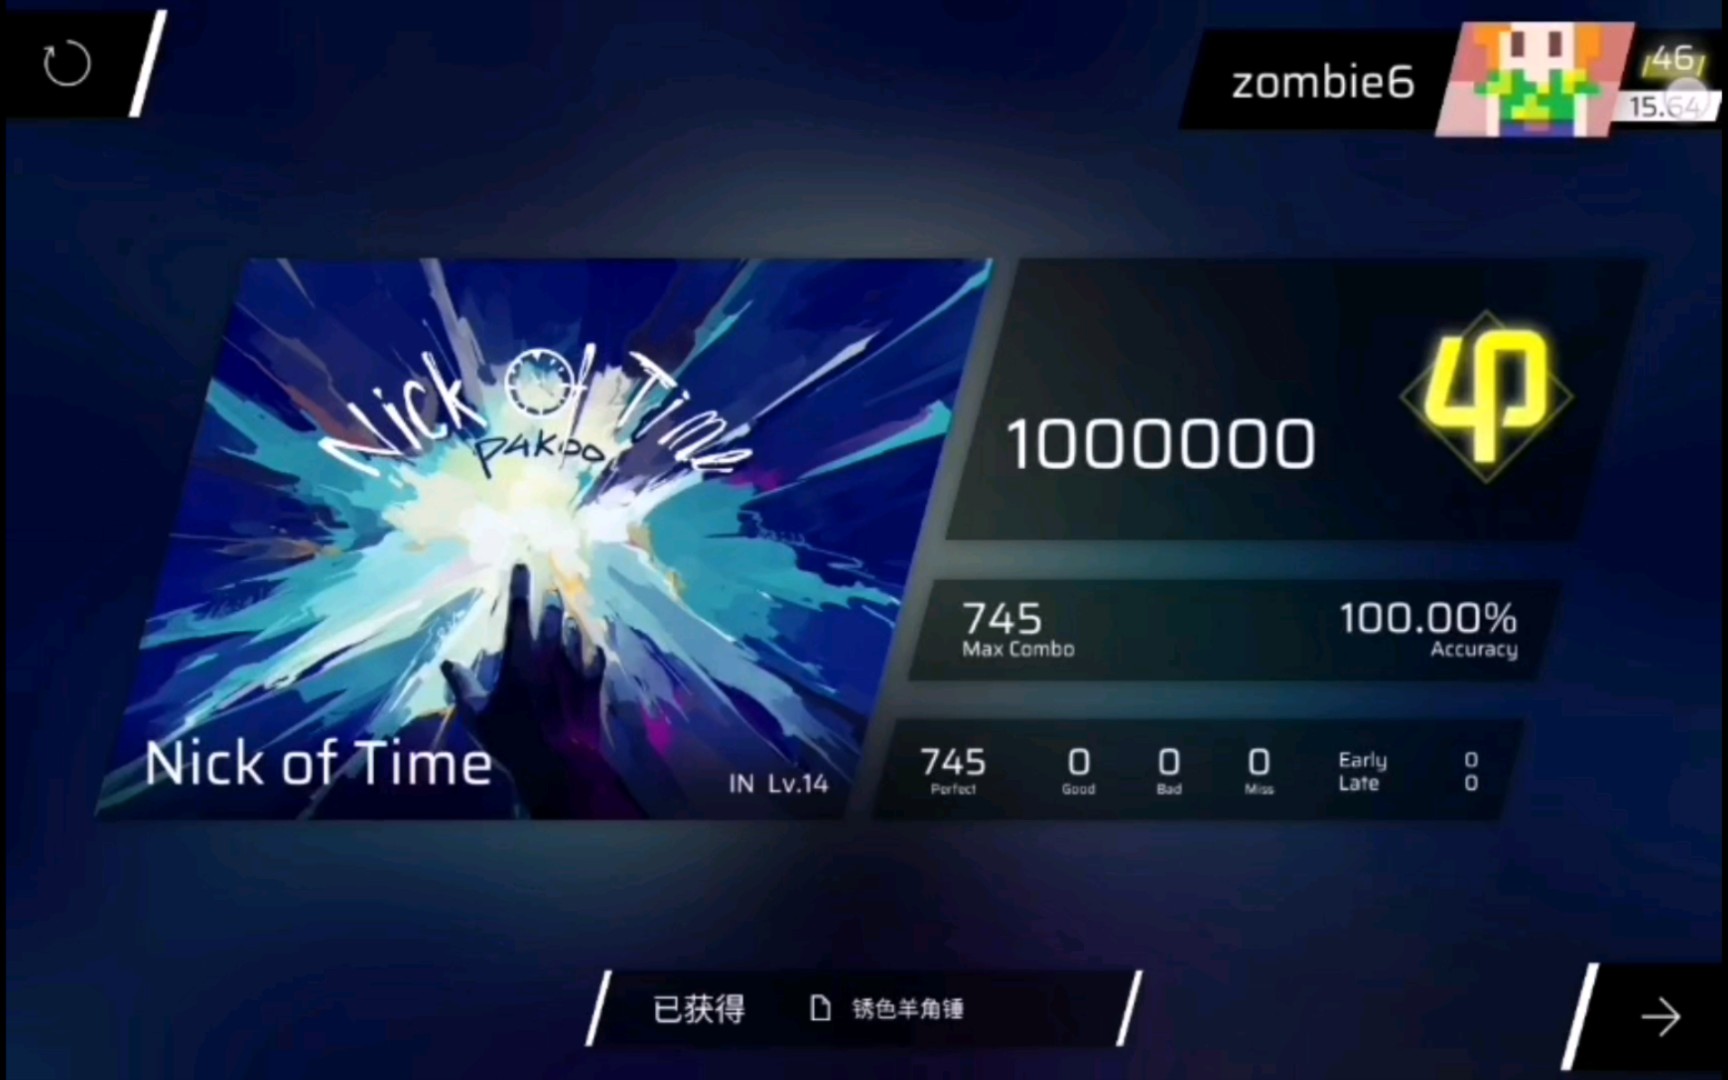 【Phigros】IN Lv.14 Nick of Time Rank φ 1000000